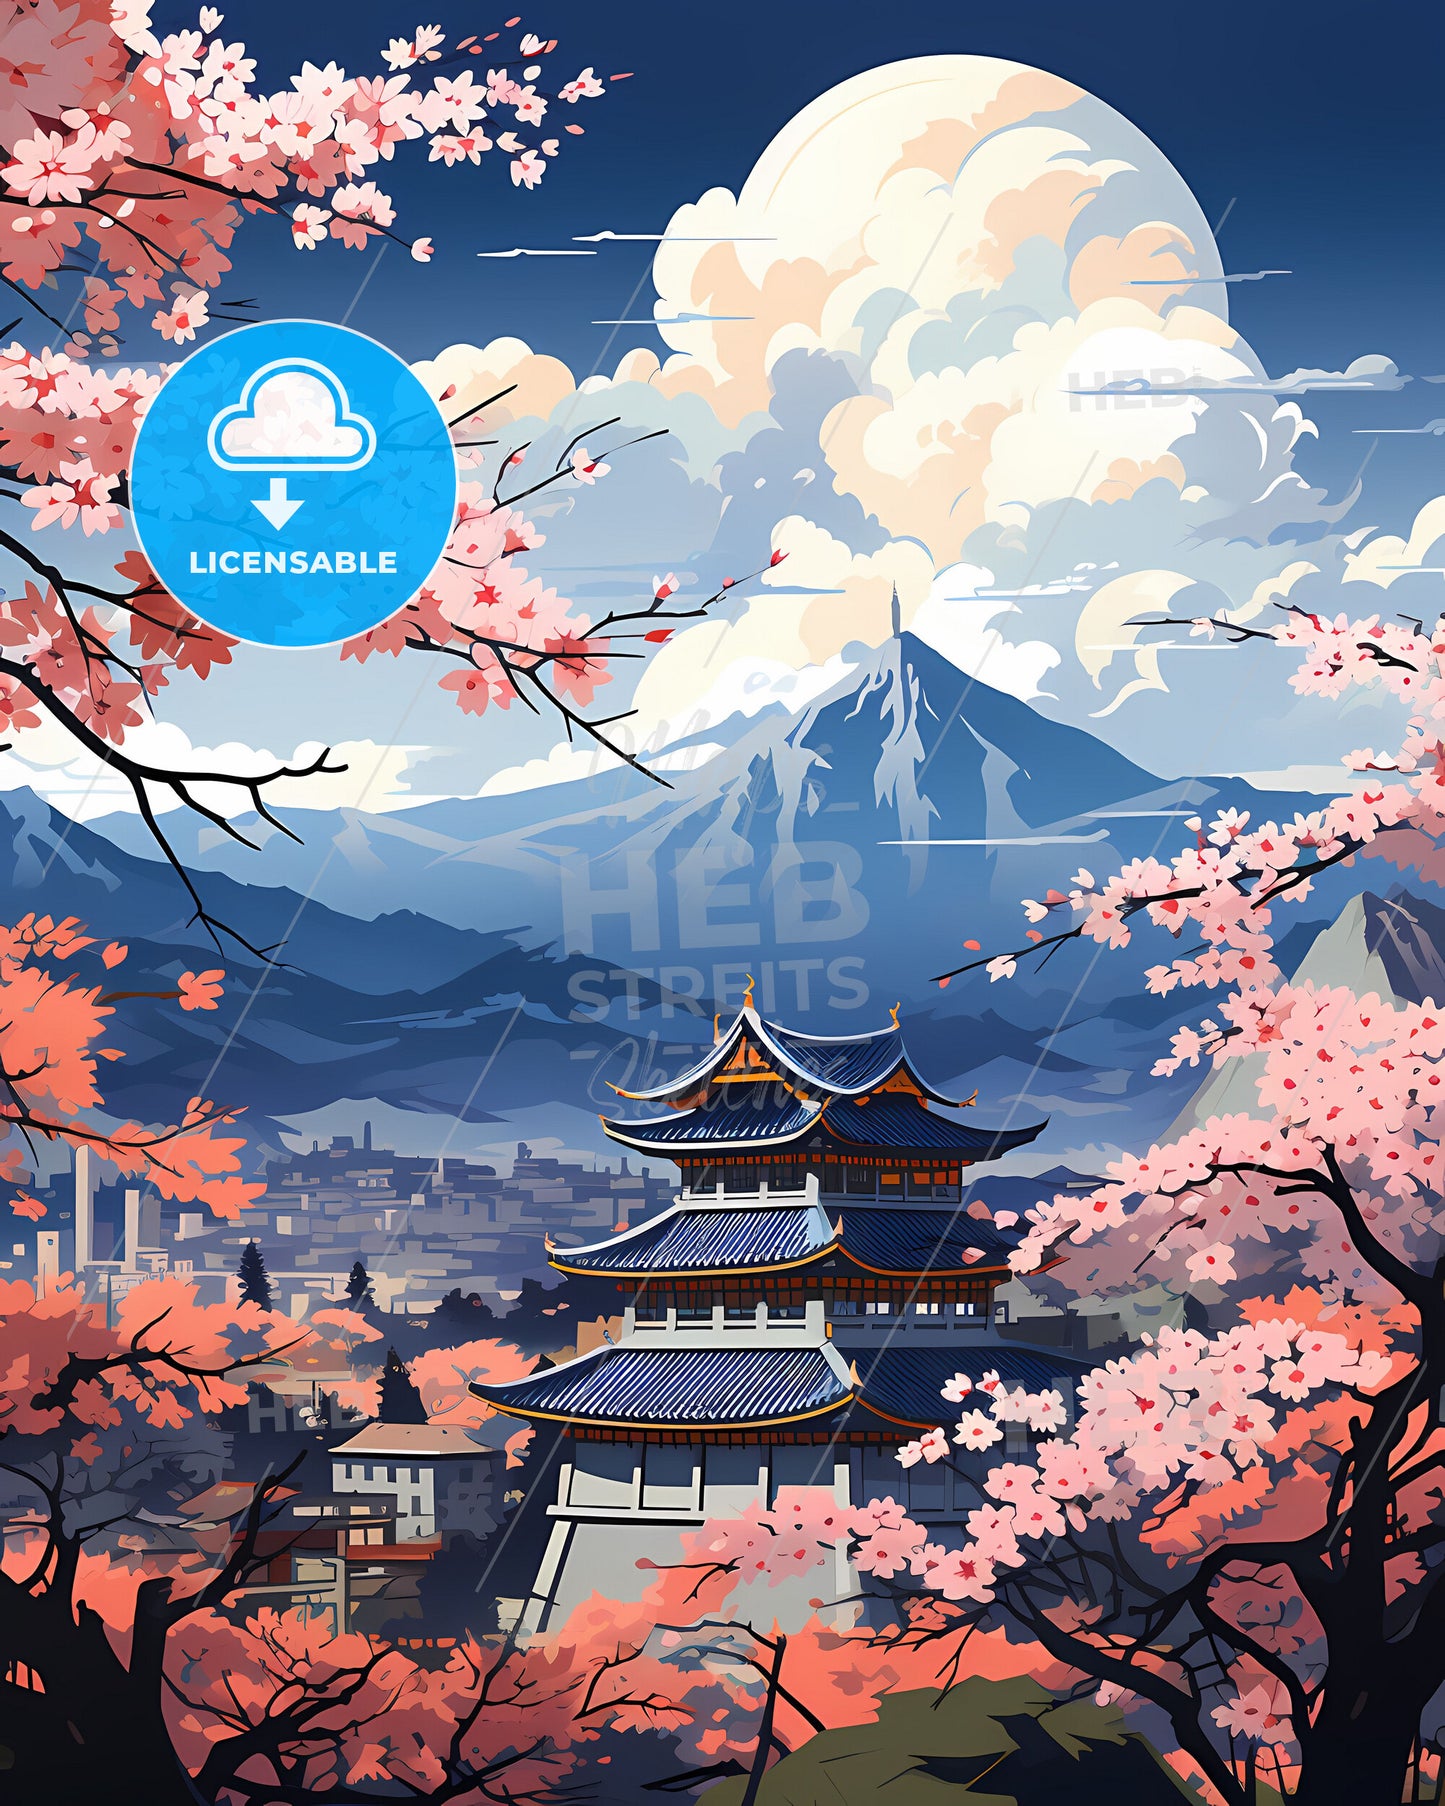 Vibrant Artistic Skyline Painting of Shantou China with Pagoda and Cherry Blossoms Against Mountain Landscape